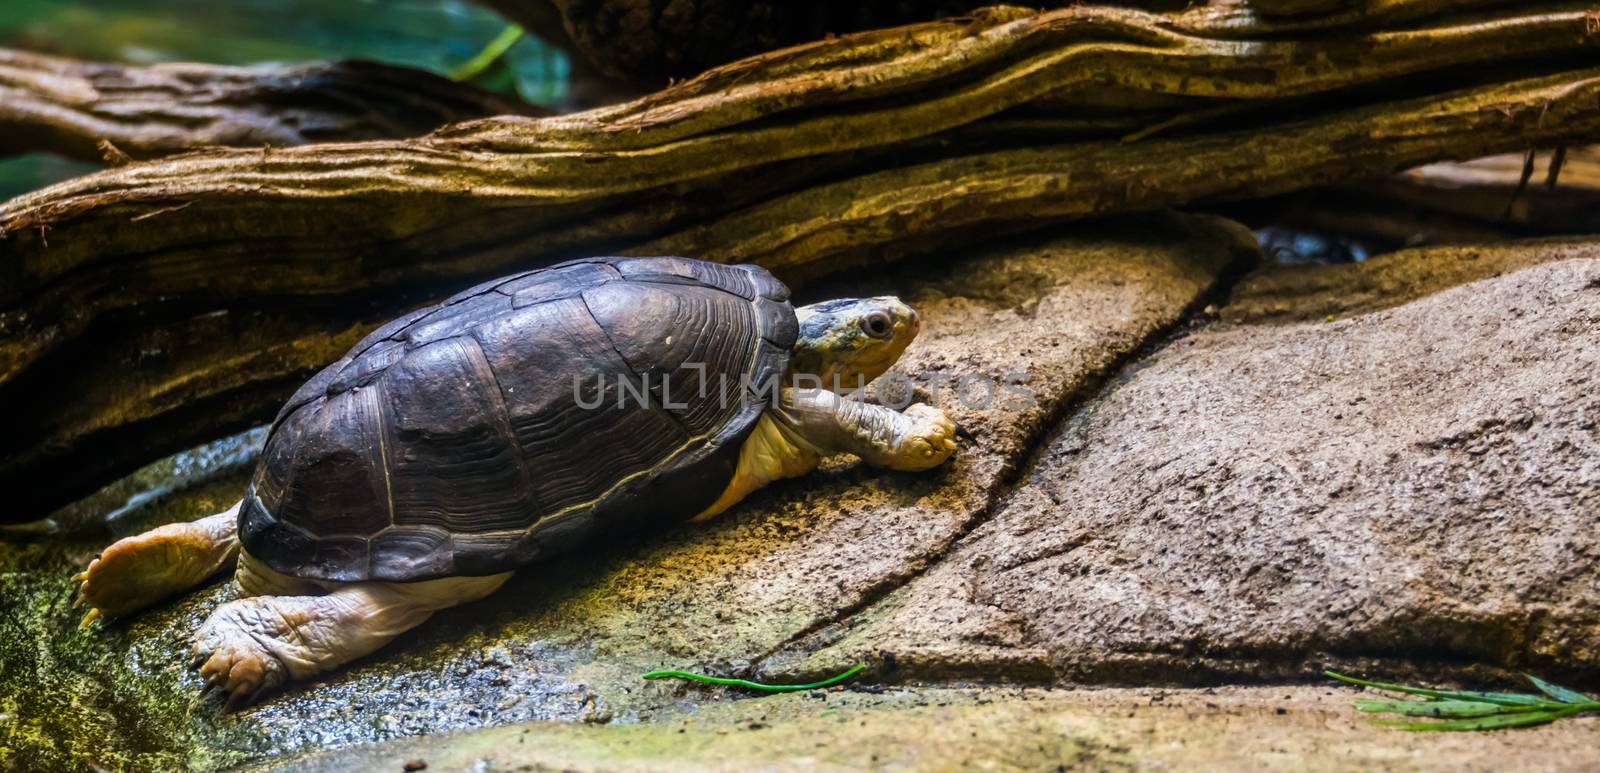 central african mud turtle walking at the water side, tropical semi aquatic turtle from Africa by charlottebleijenberg